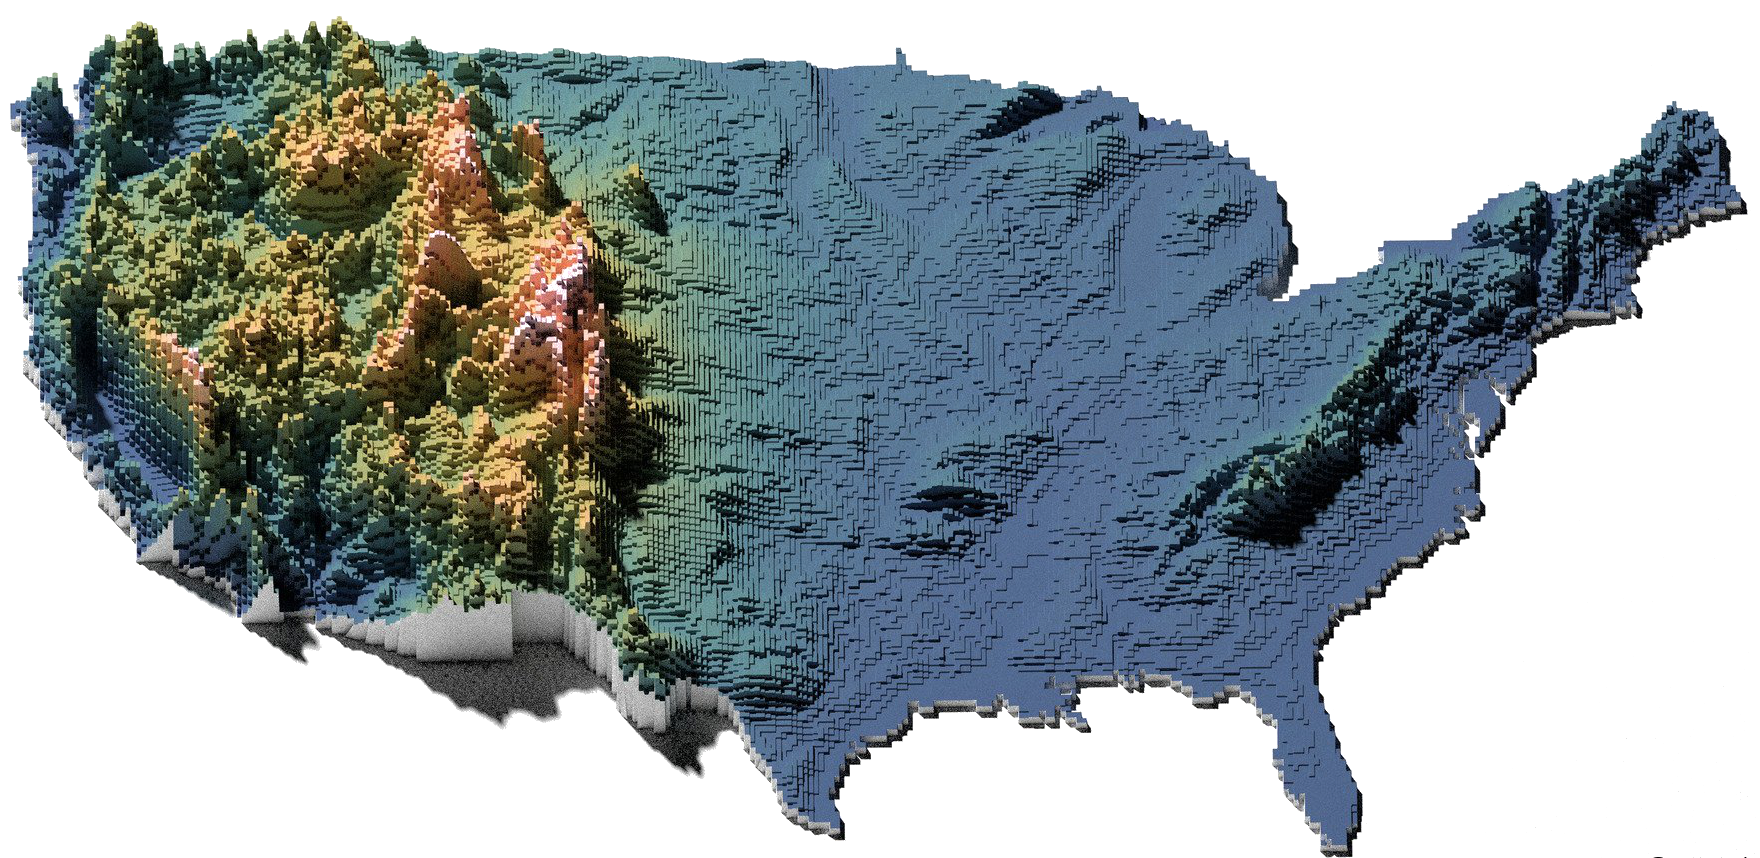 Mean elevation by U.S. state; high resolution elevation map